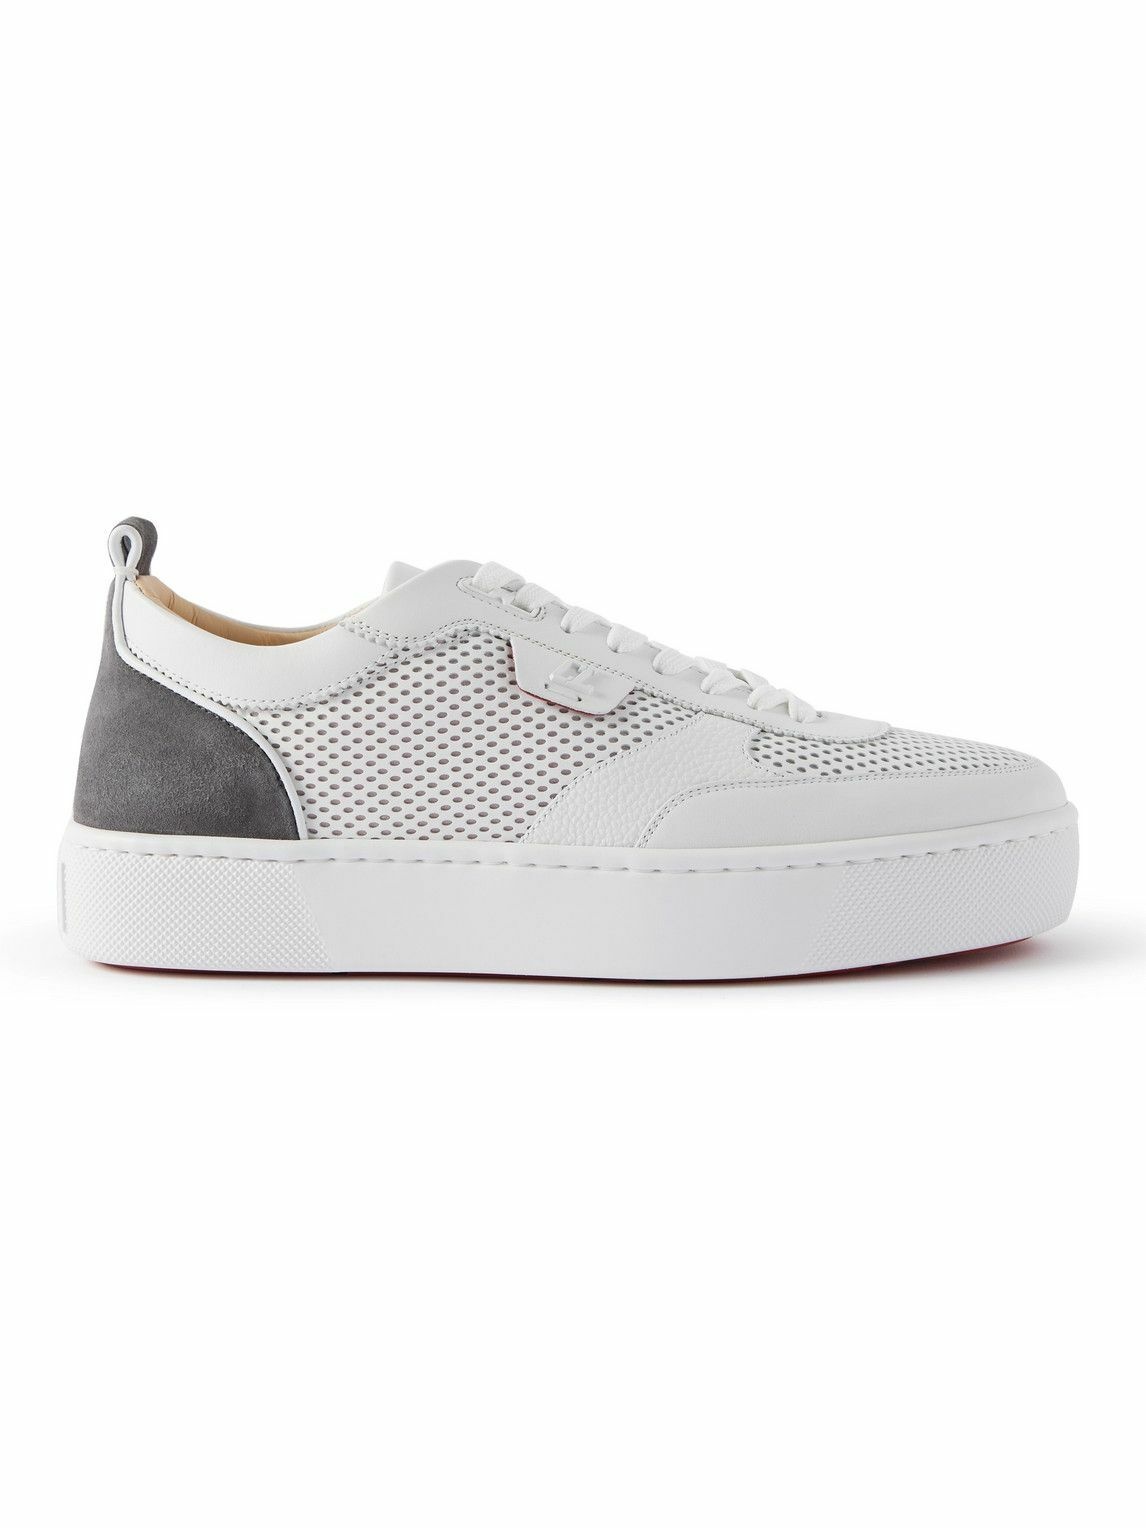 Christian Louboutin Outlet: Happyrui Spikes leather sneakers - White